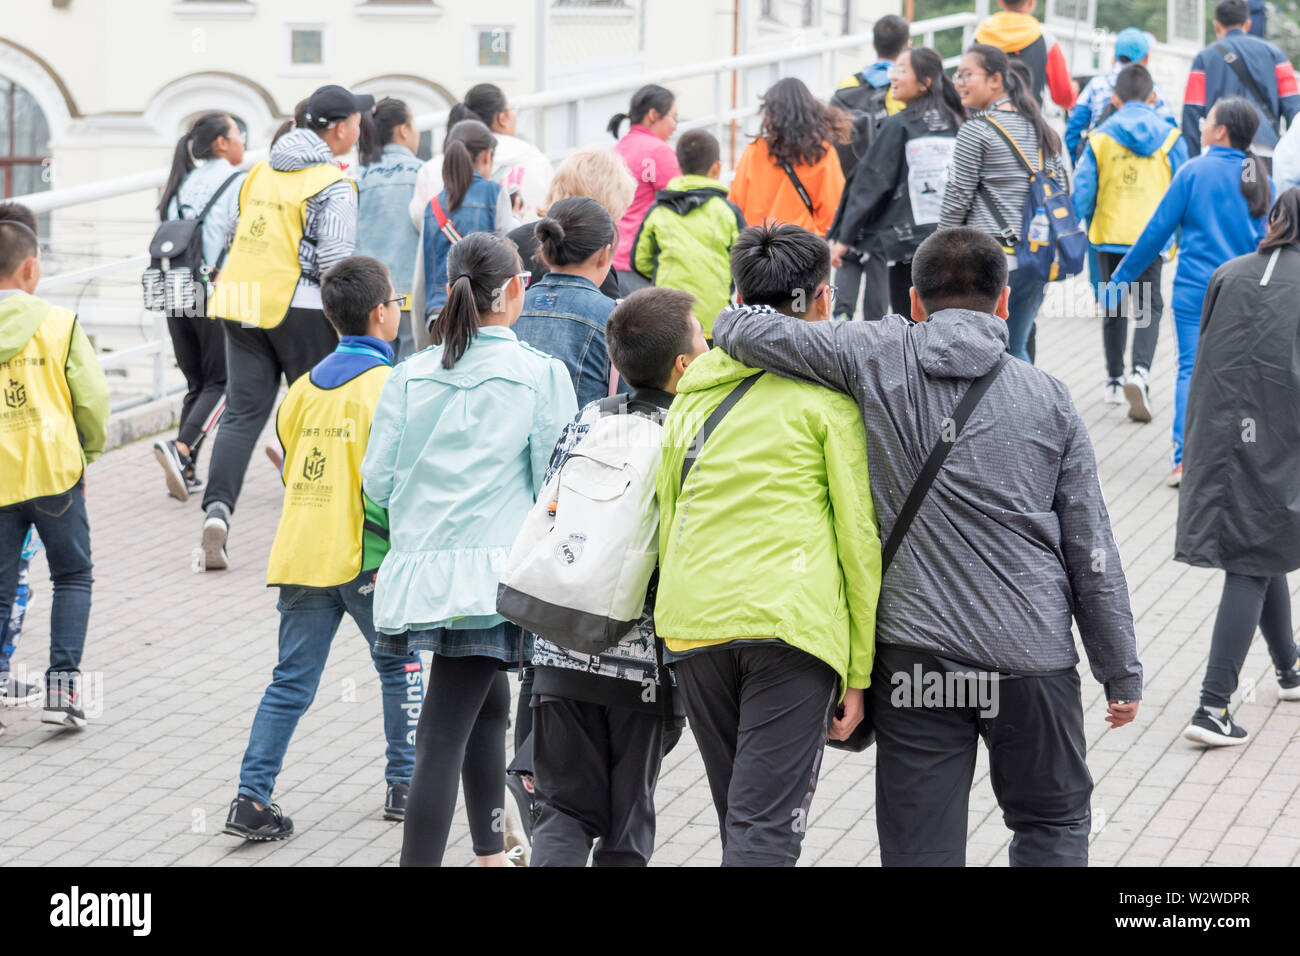 Russia, Vladivostok, 07/06/2019. Group of kids tourists from South Korea walking in city downtown. Tourism in Vladivostok, asian schoolchilds and kids Stock Photo